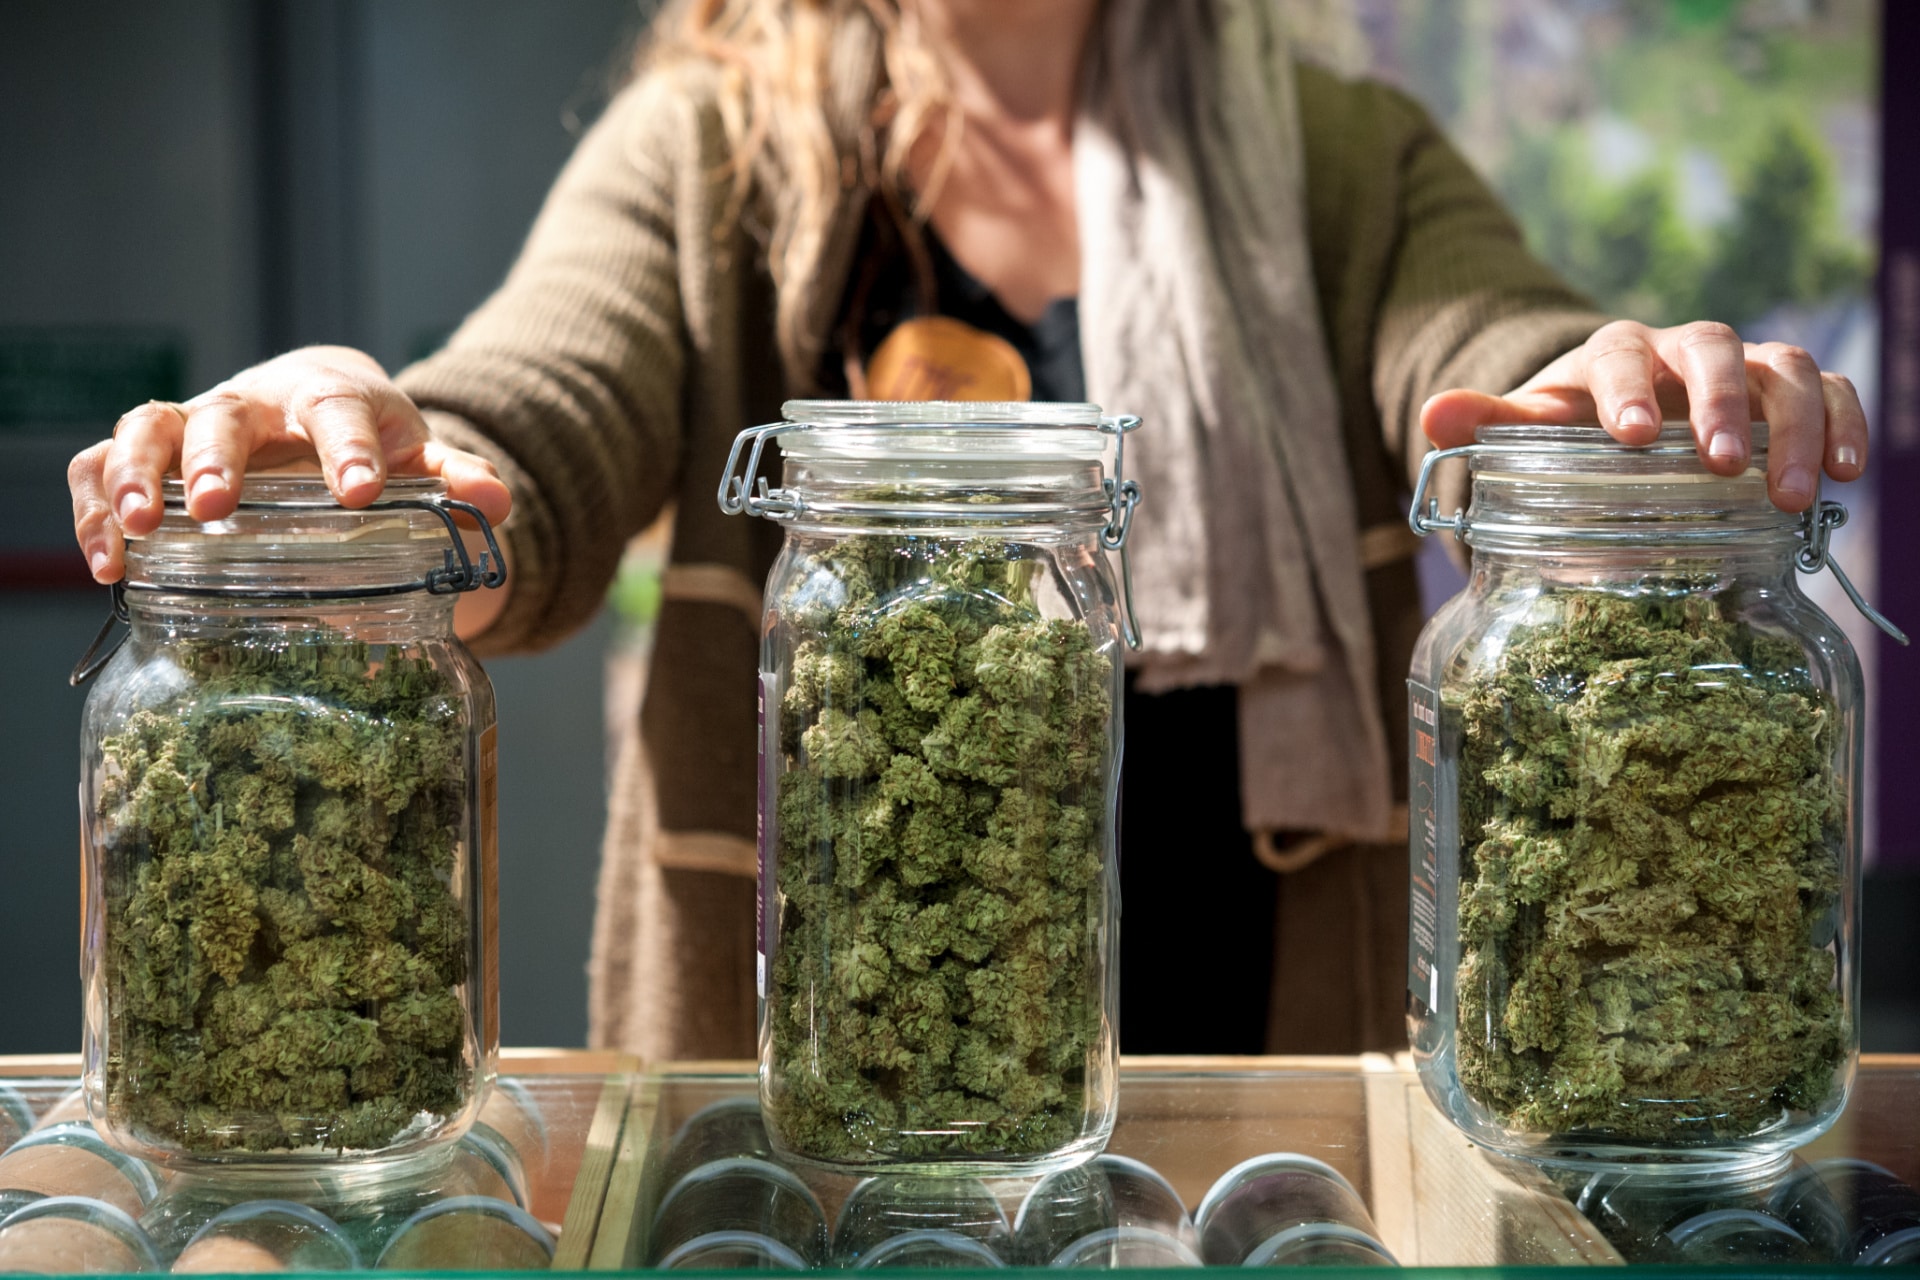 Cannabis flower strains displayed in glass jars at a dispensary.